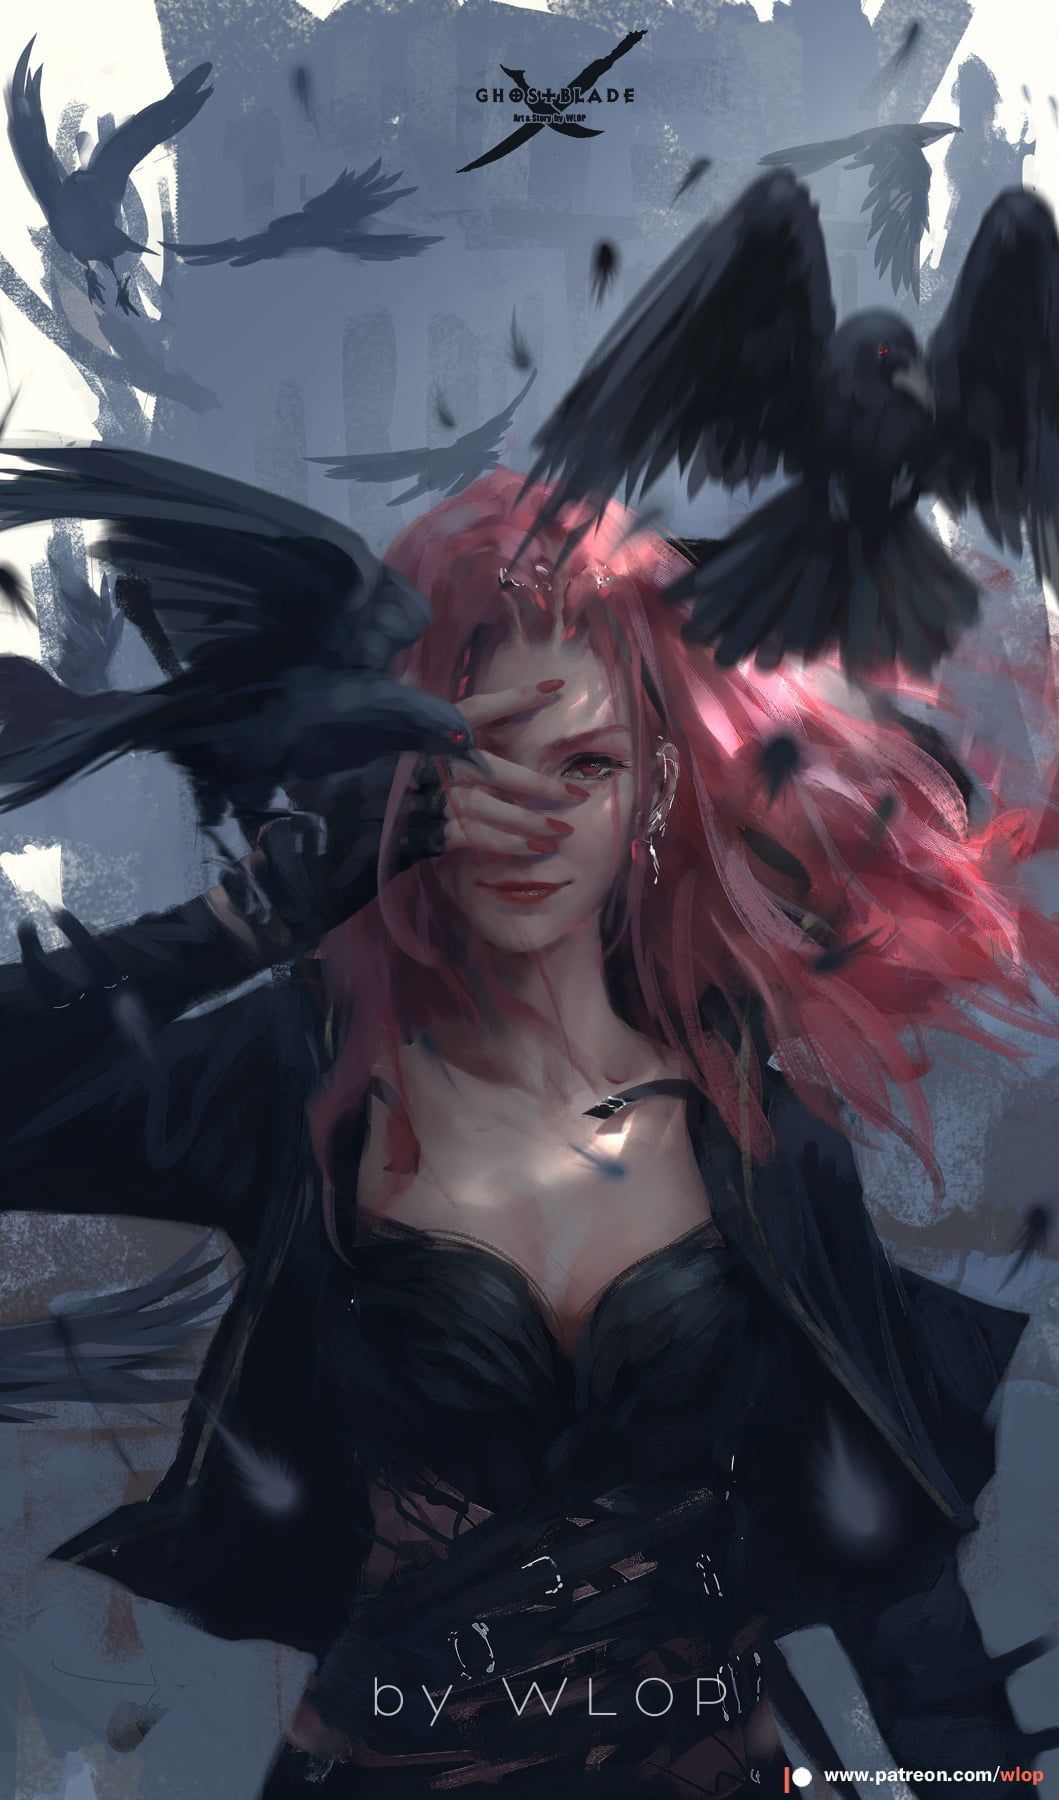 Ghost Blade #WLOP anime girls #birds #anime #redhead painted nails